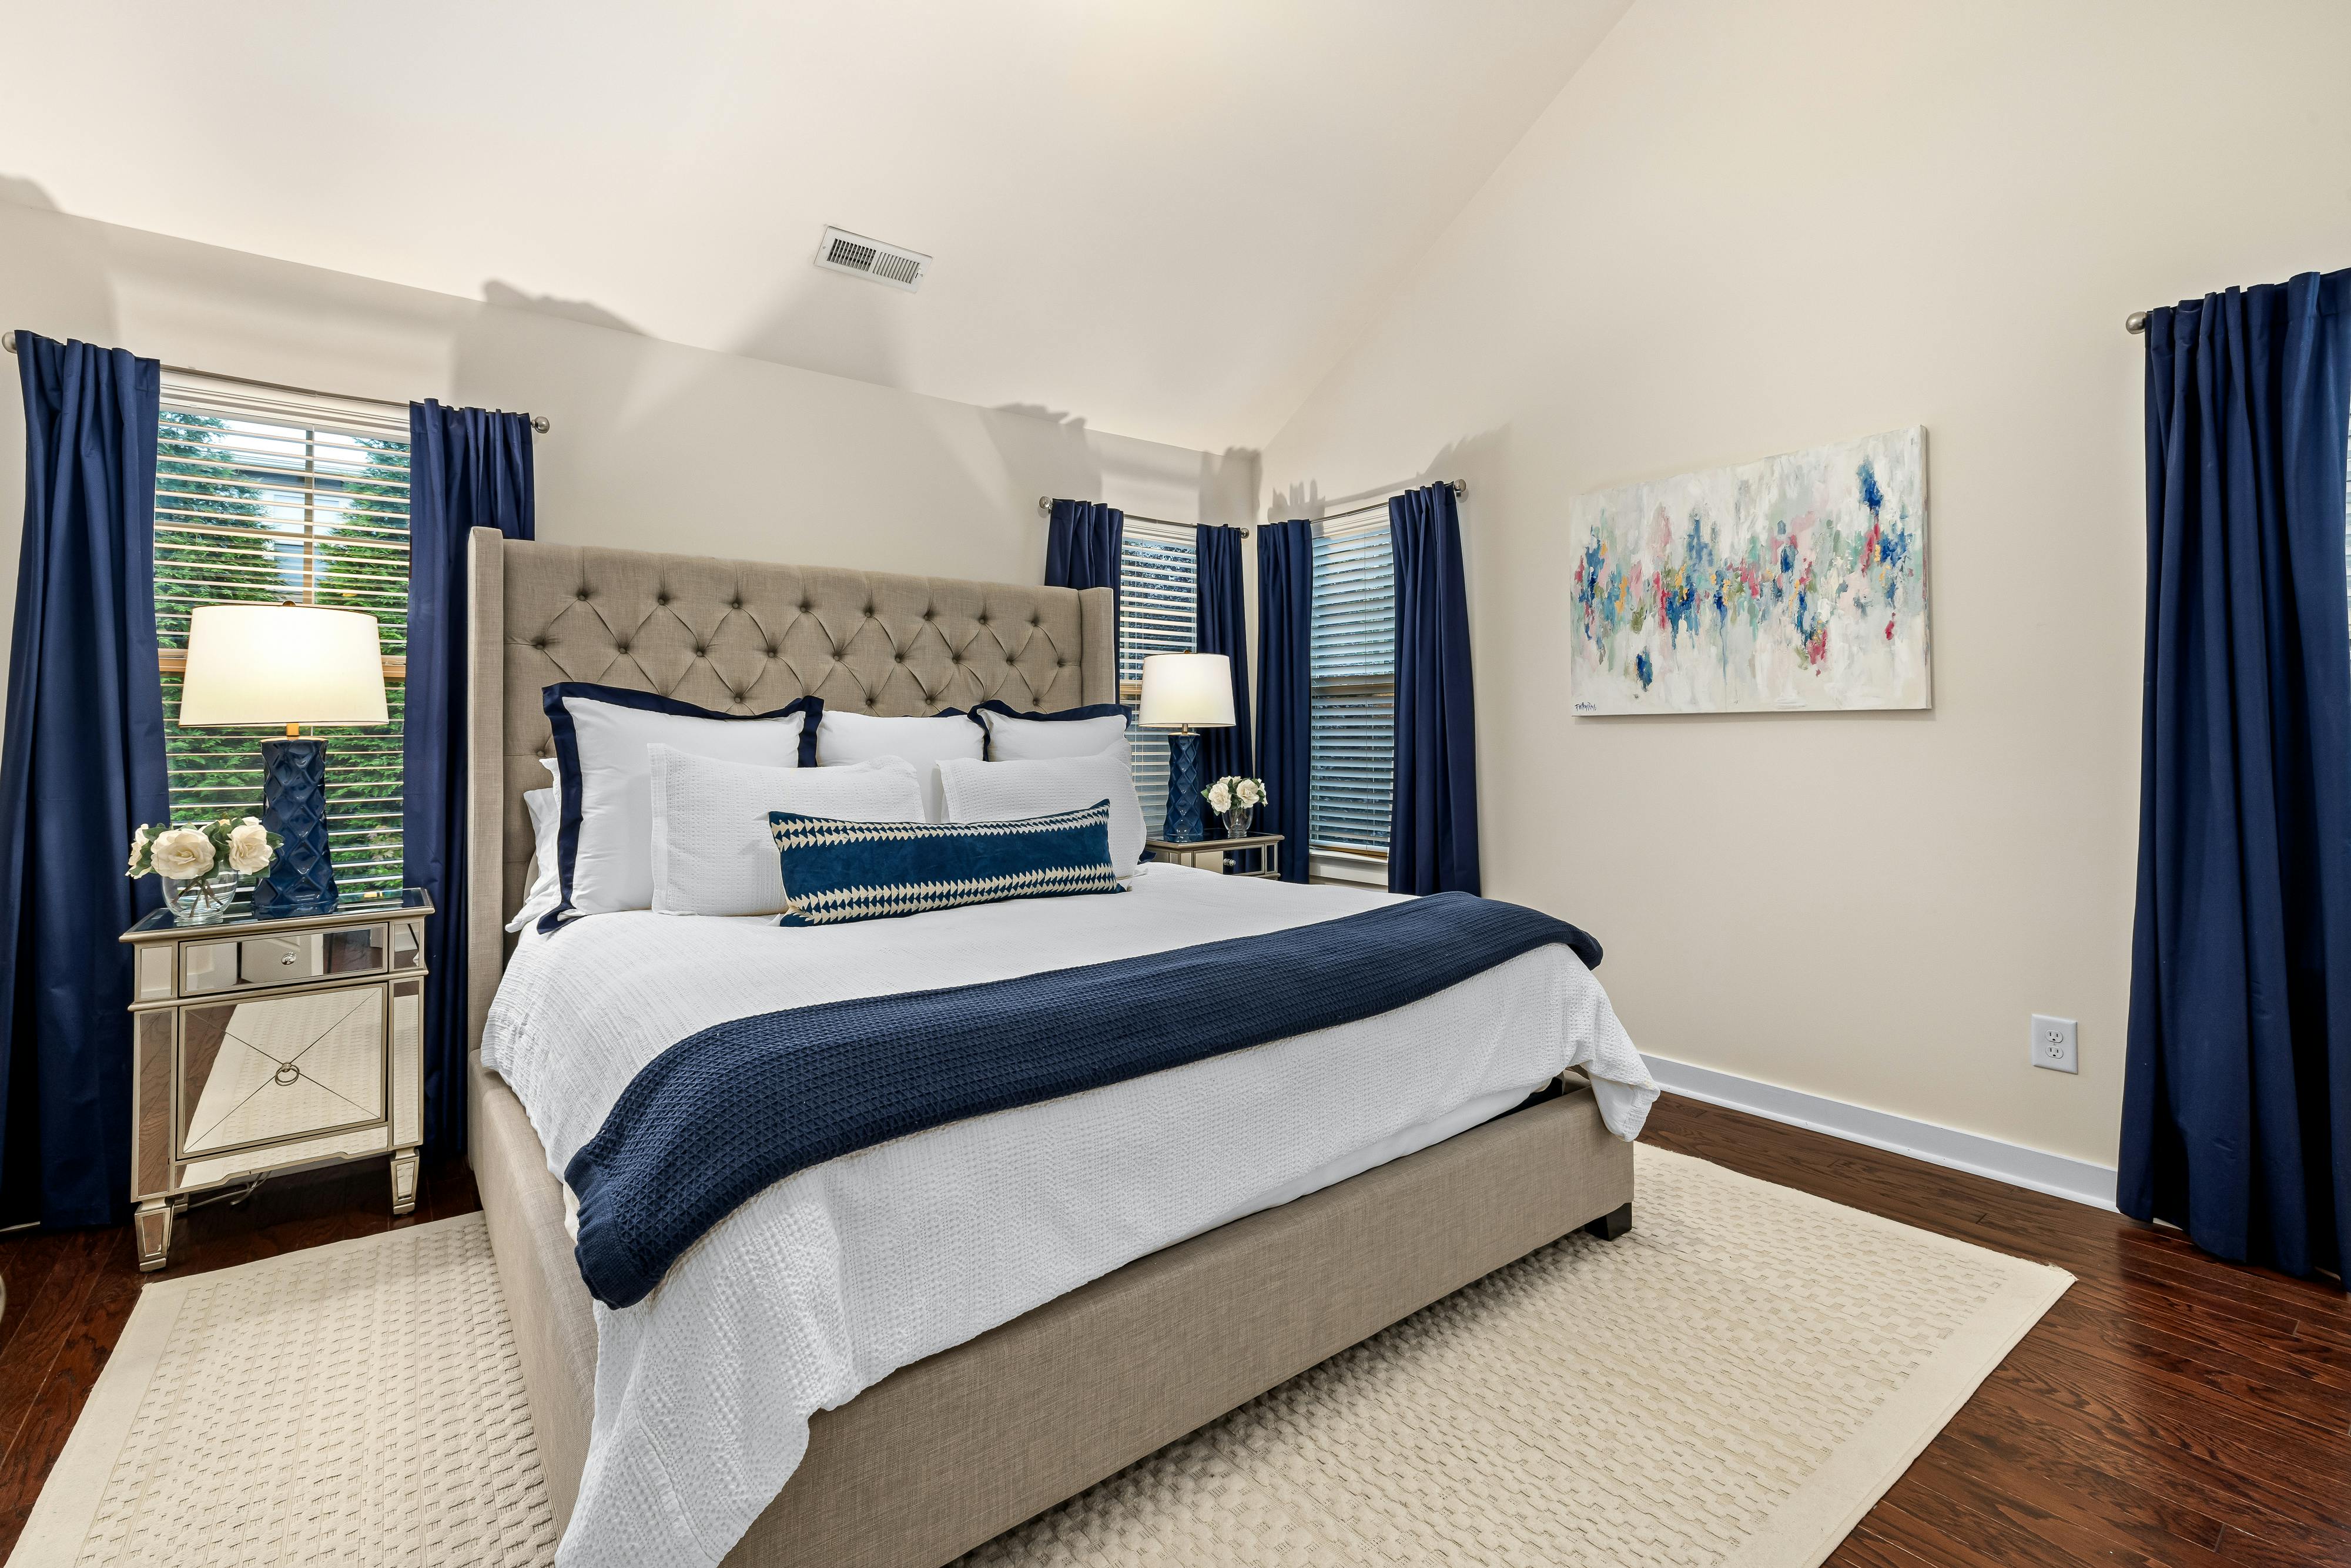 big bed with white and blue color linen in the middle of the bedroom 